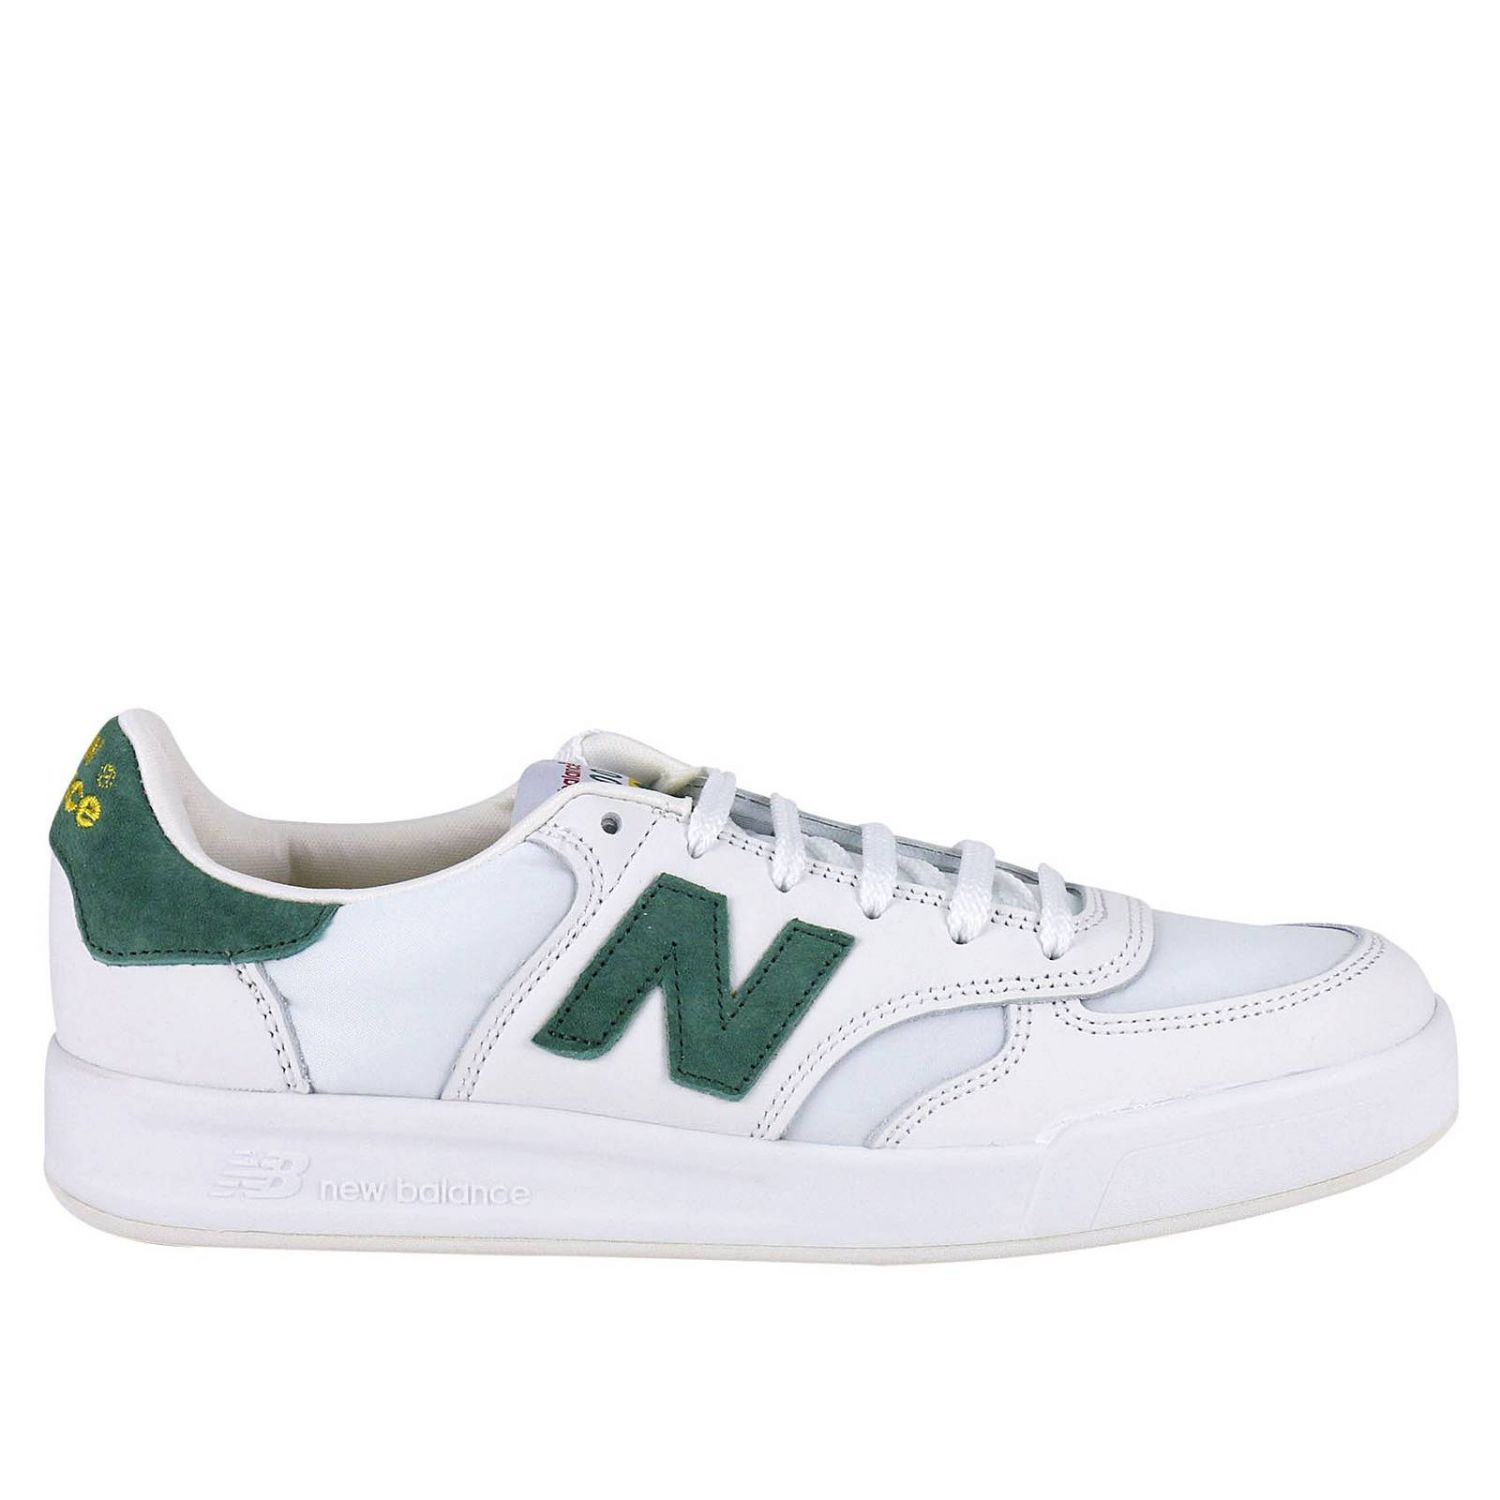 New Balance Outlet: Sneaker CT300 